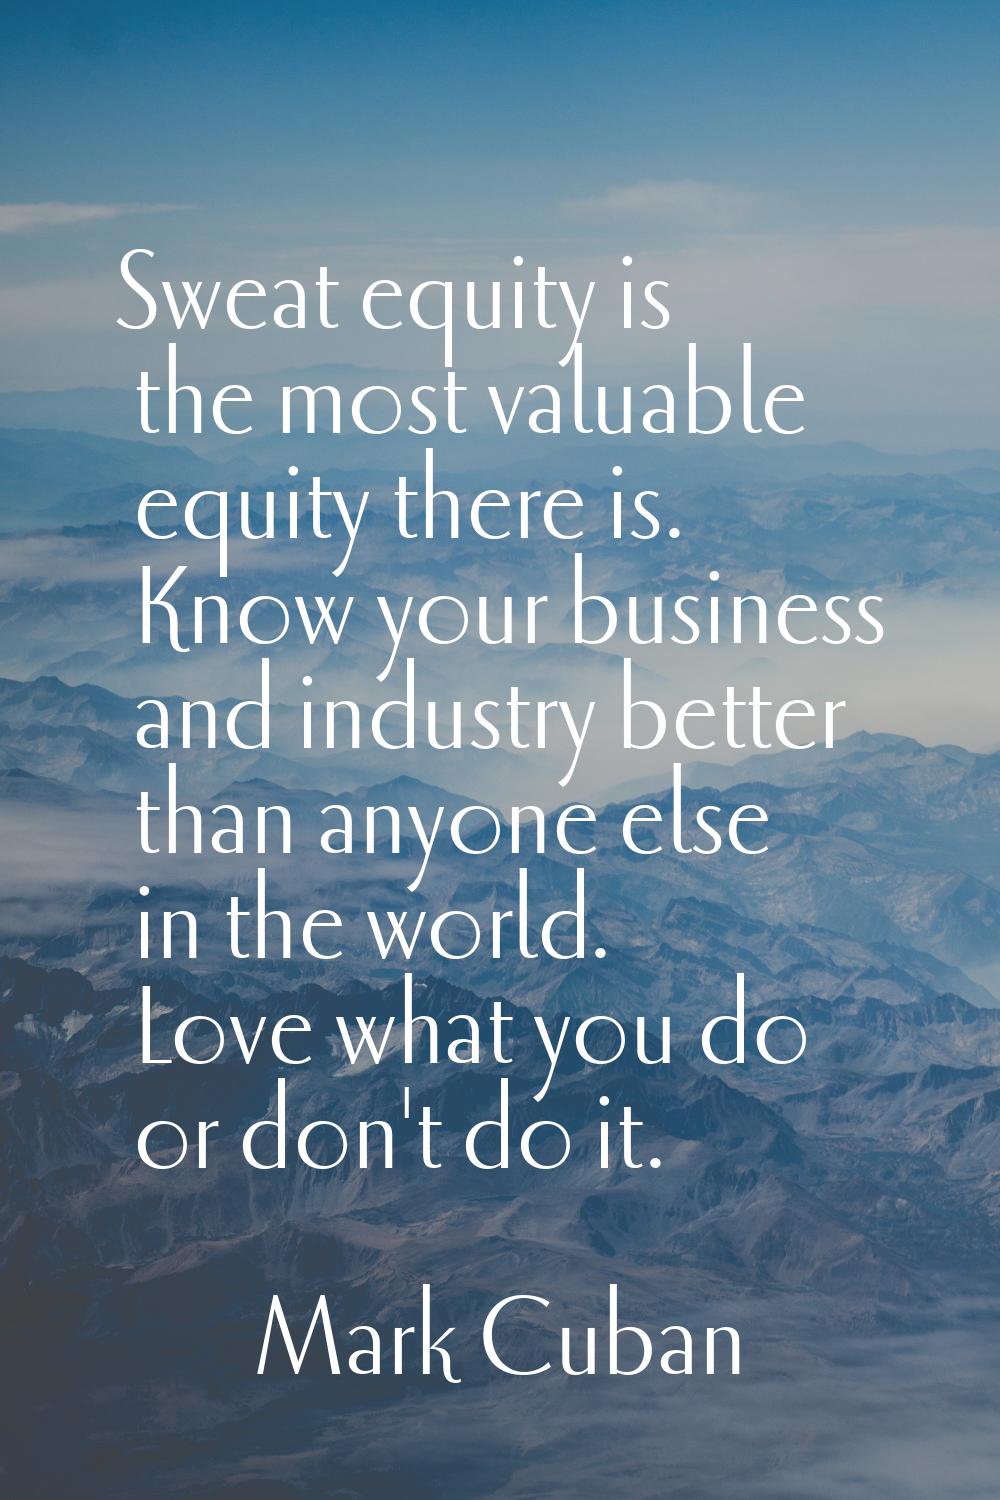 Sweat equity is the most valuable equity there is. Know your business and industry better than anyo